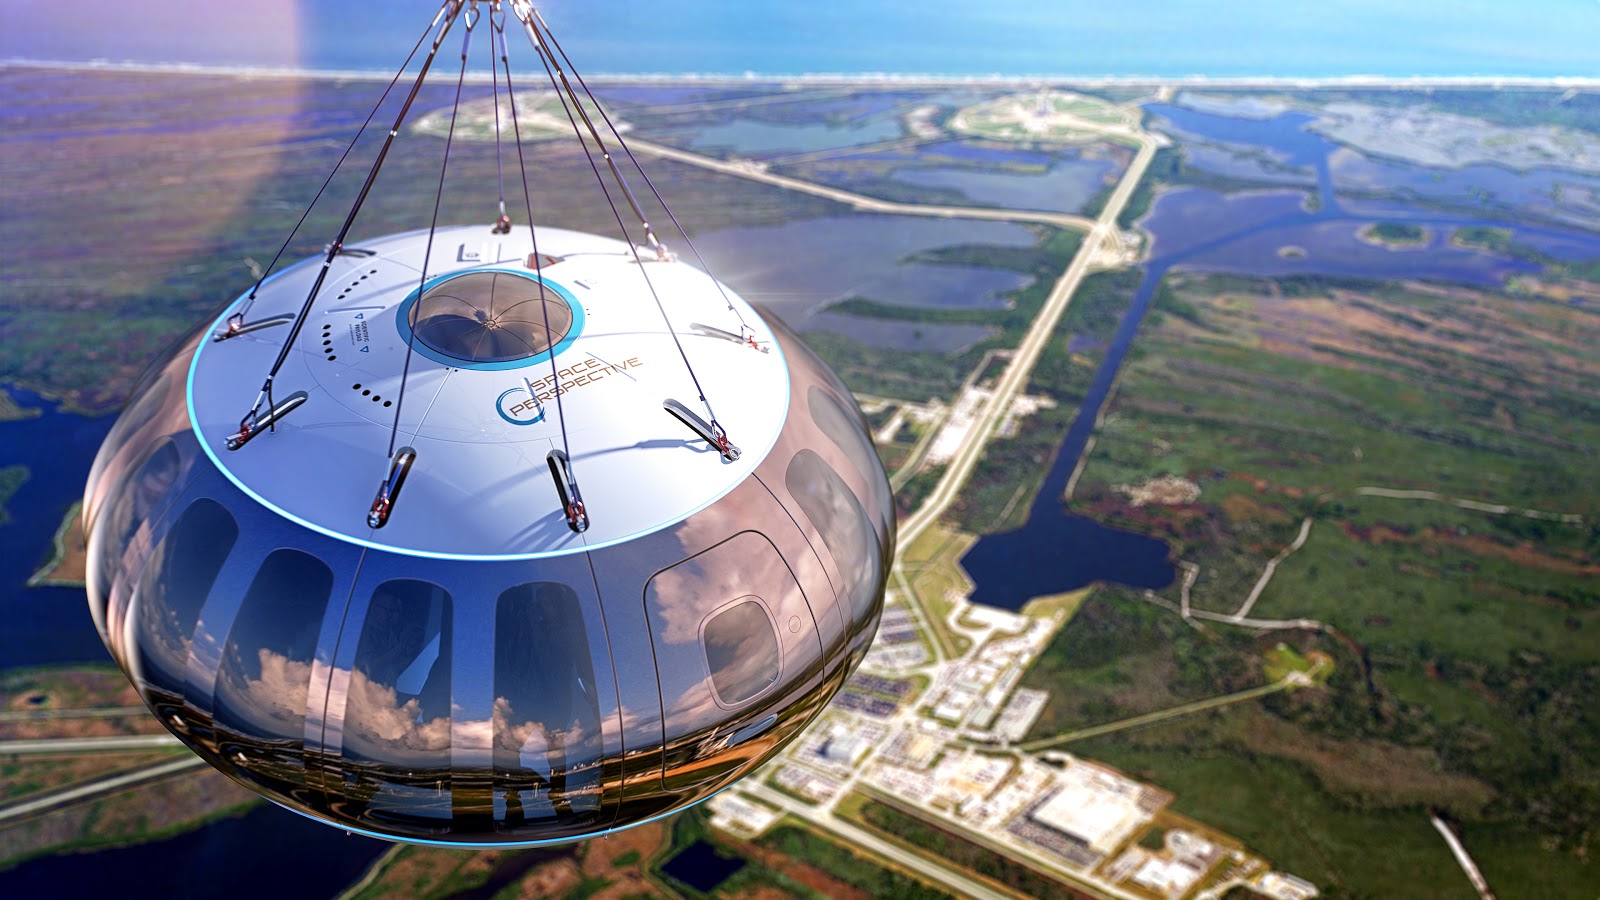 Fly to the edge of Space with a balloon for $125,000